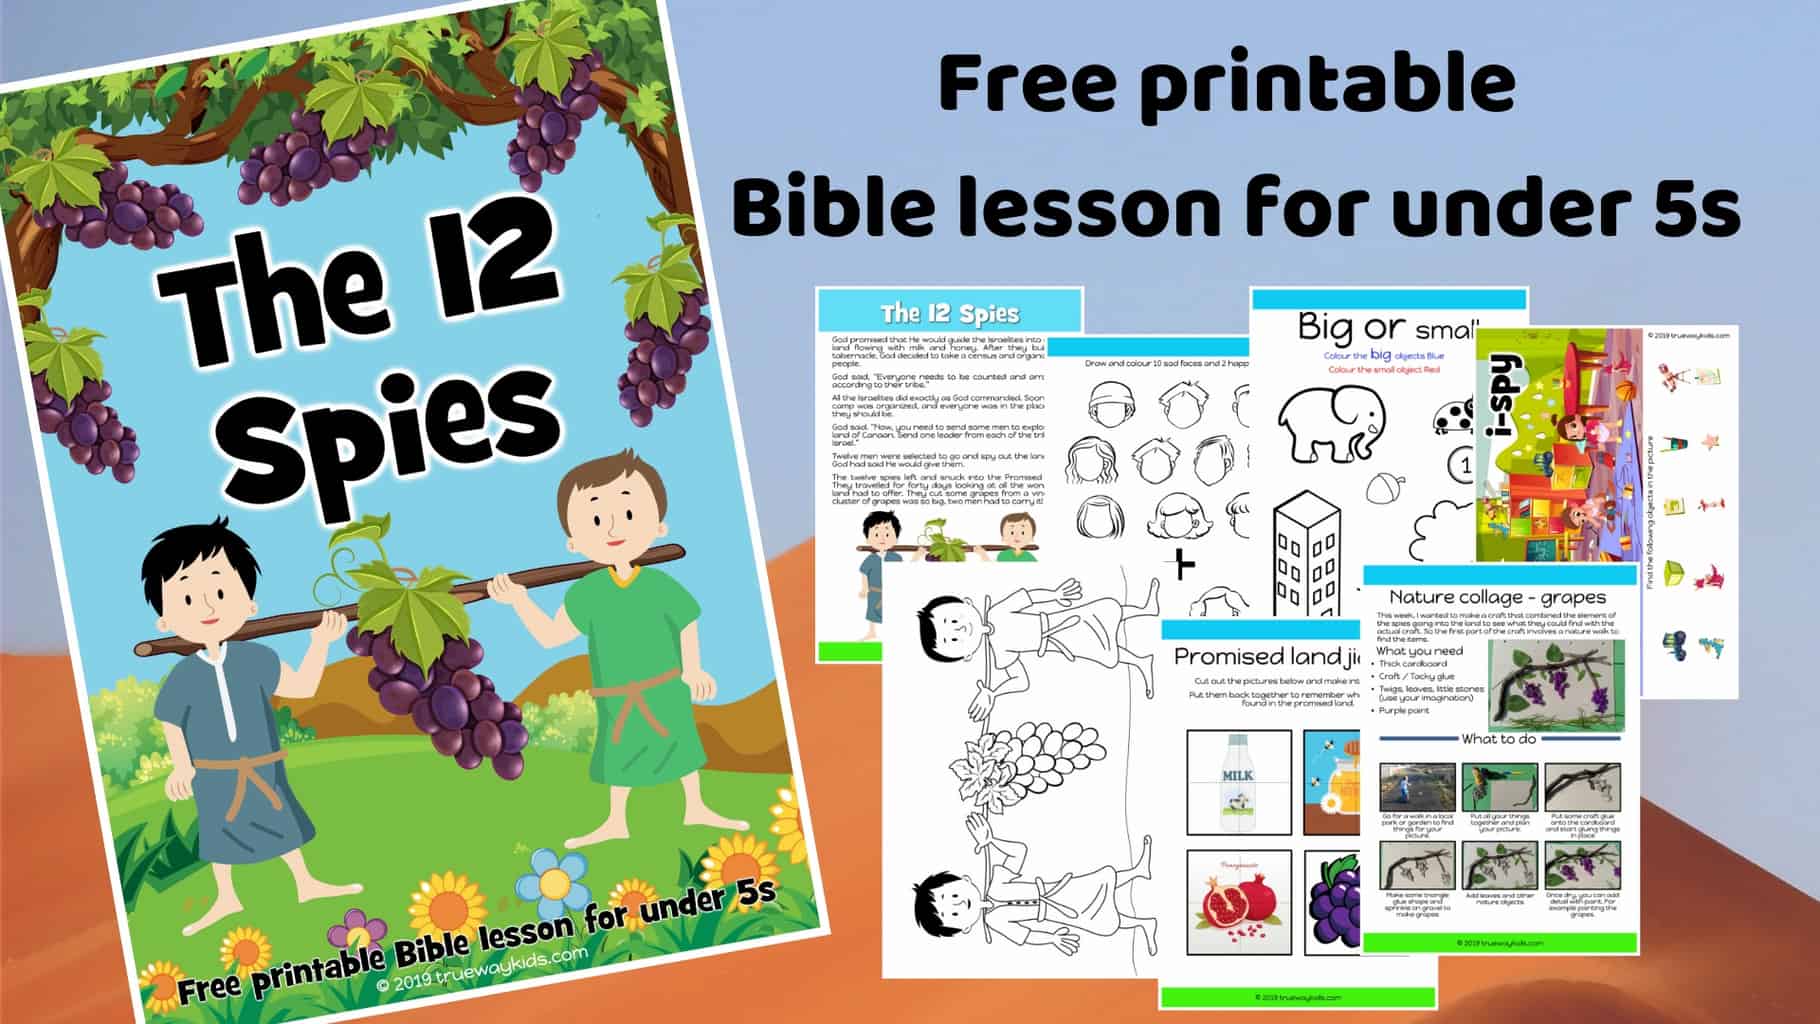 The 12 Spies And The Promised Land Free Bible Lesson For Under 5s Trueway Kids